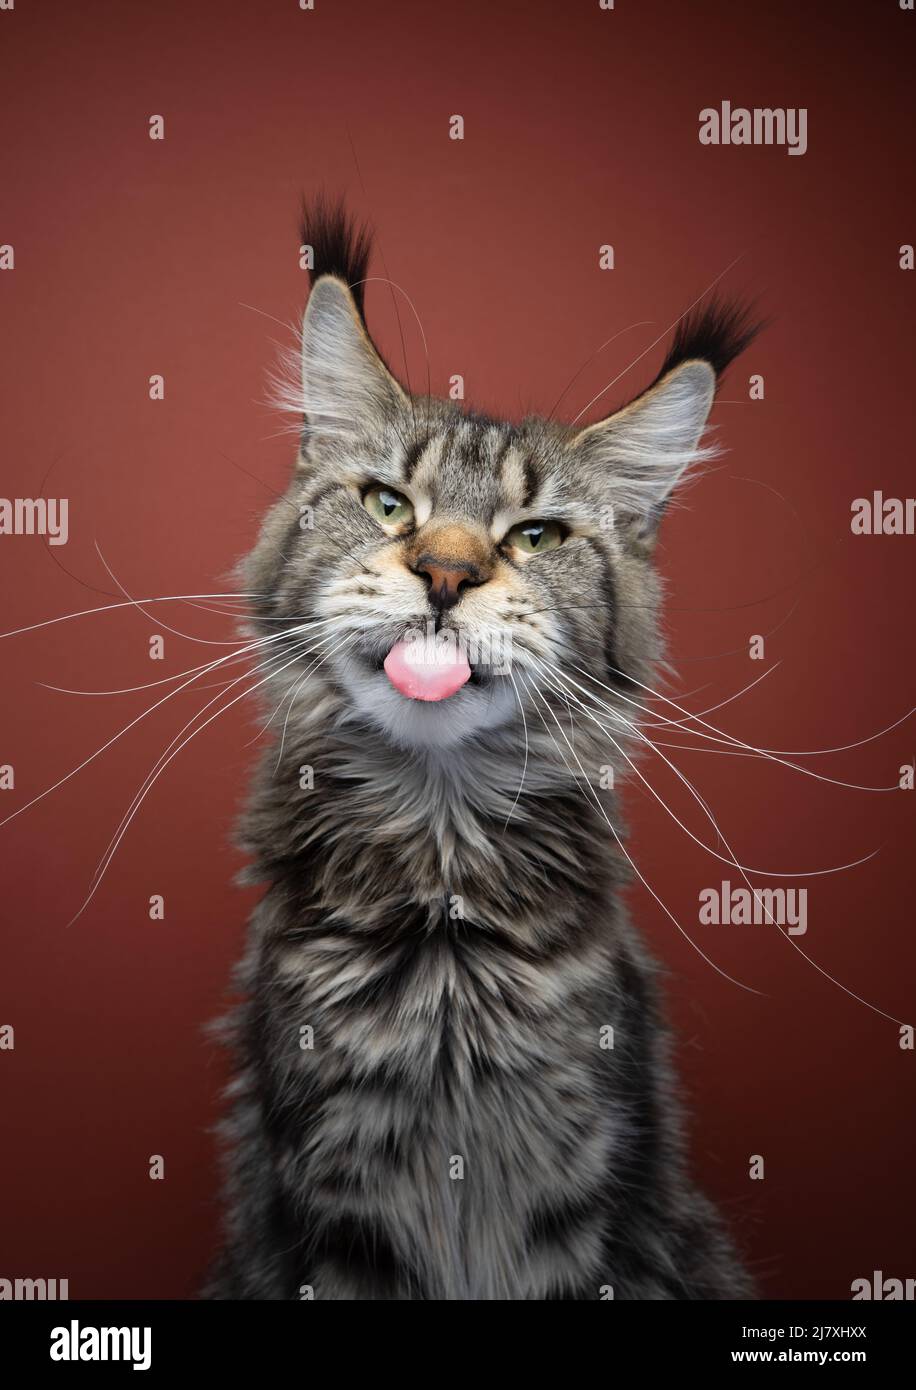 naughty maine coon cat sticking out tongue portrait with long ear tufts and whiskers Stock Photo